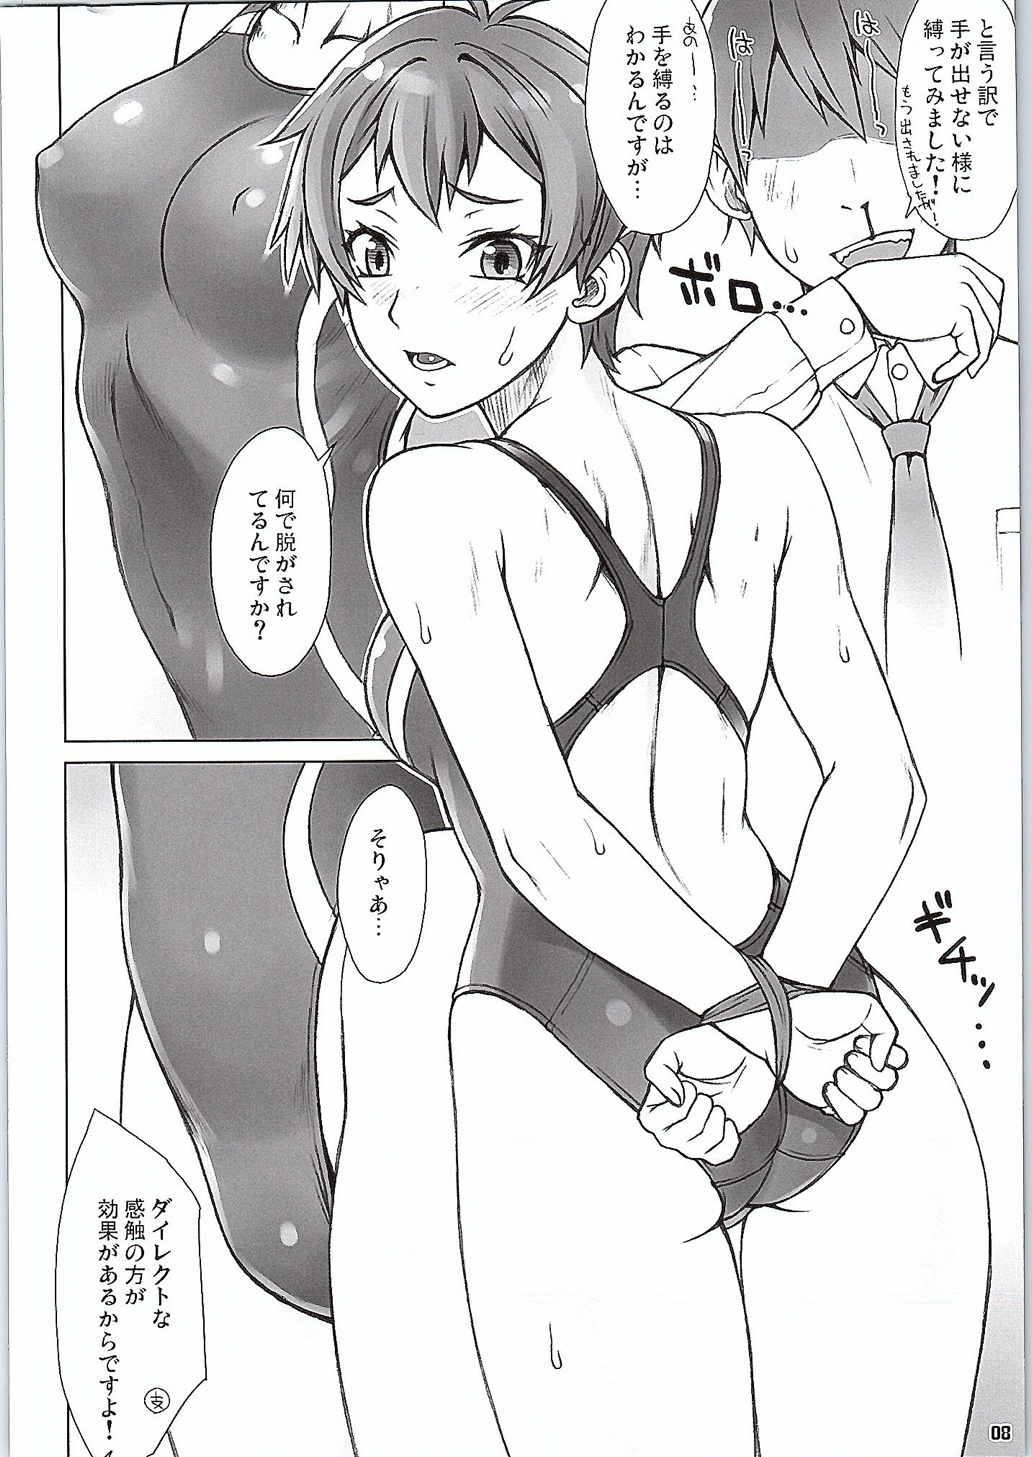 Rough Porn Do! Don't! Touch Me - Tokyo 7th sisters Hot - Page 7